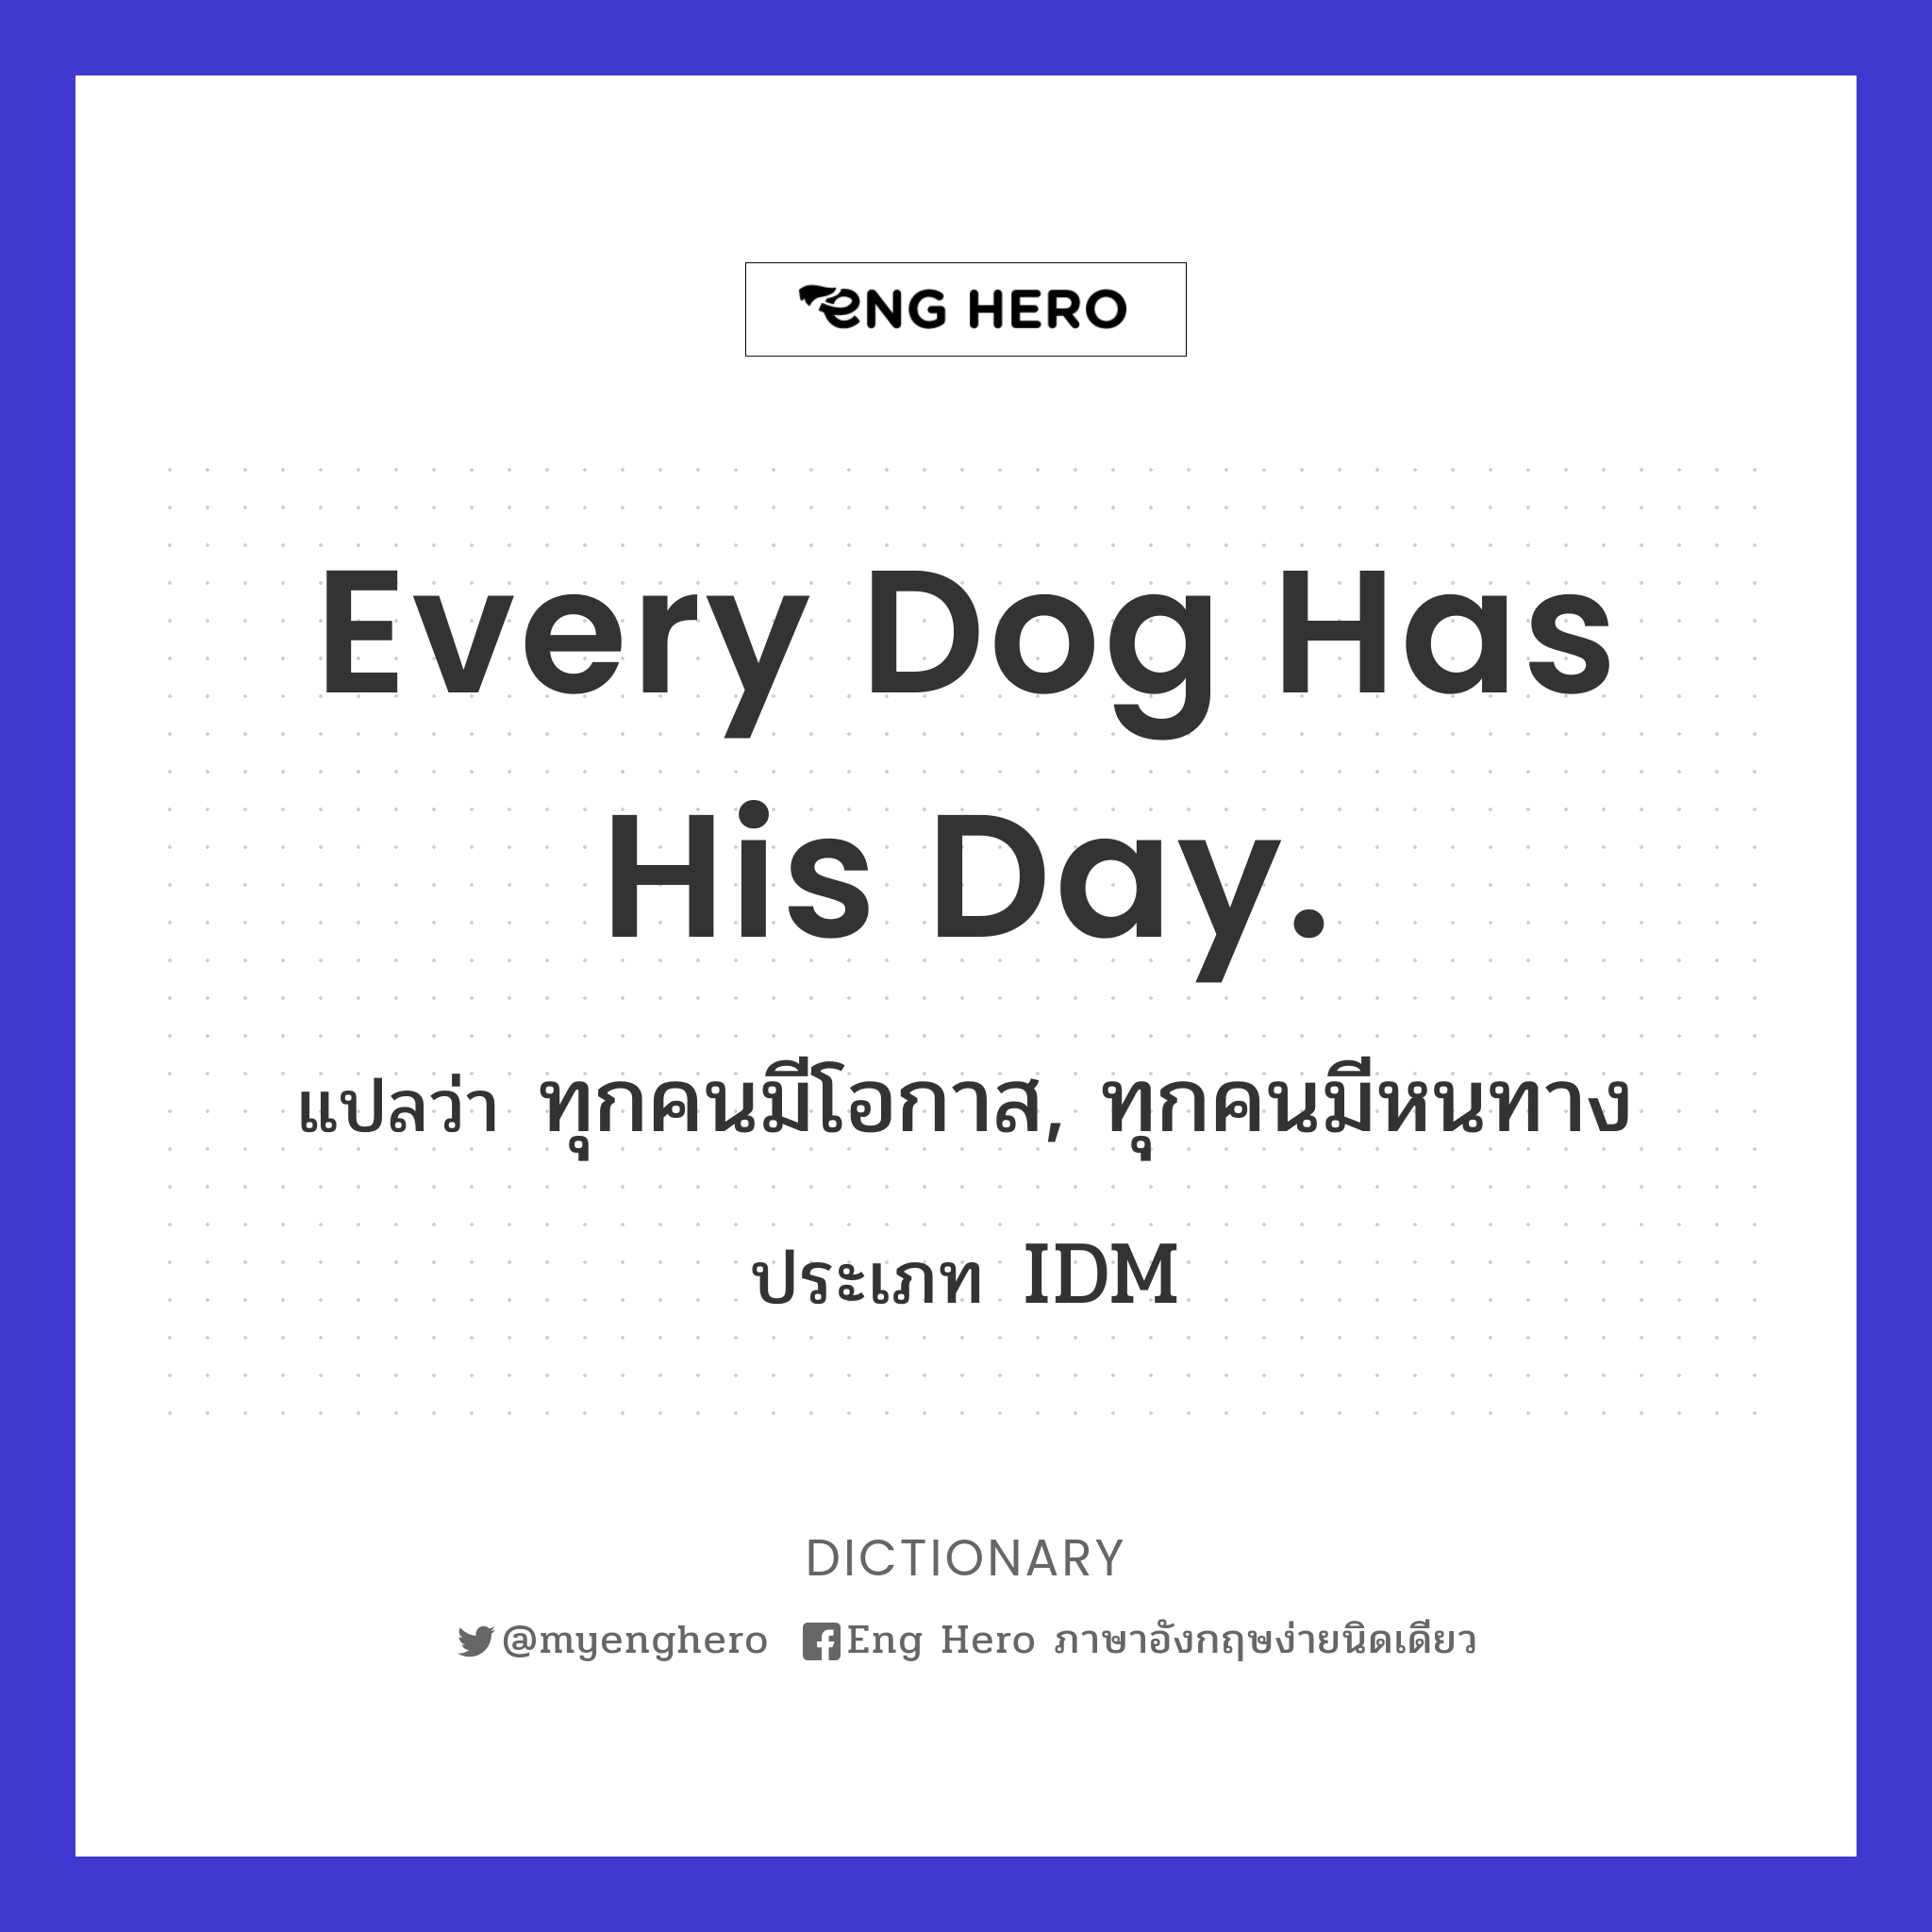 Every dog has his day.